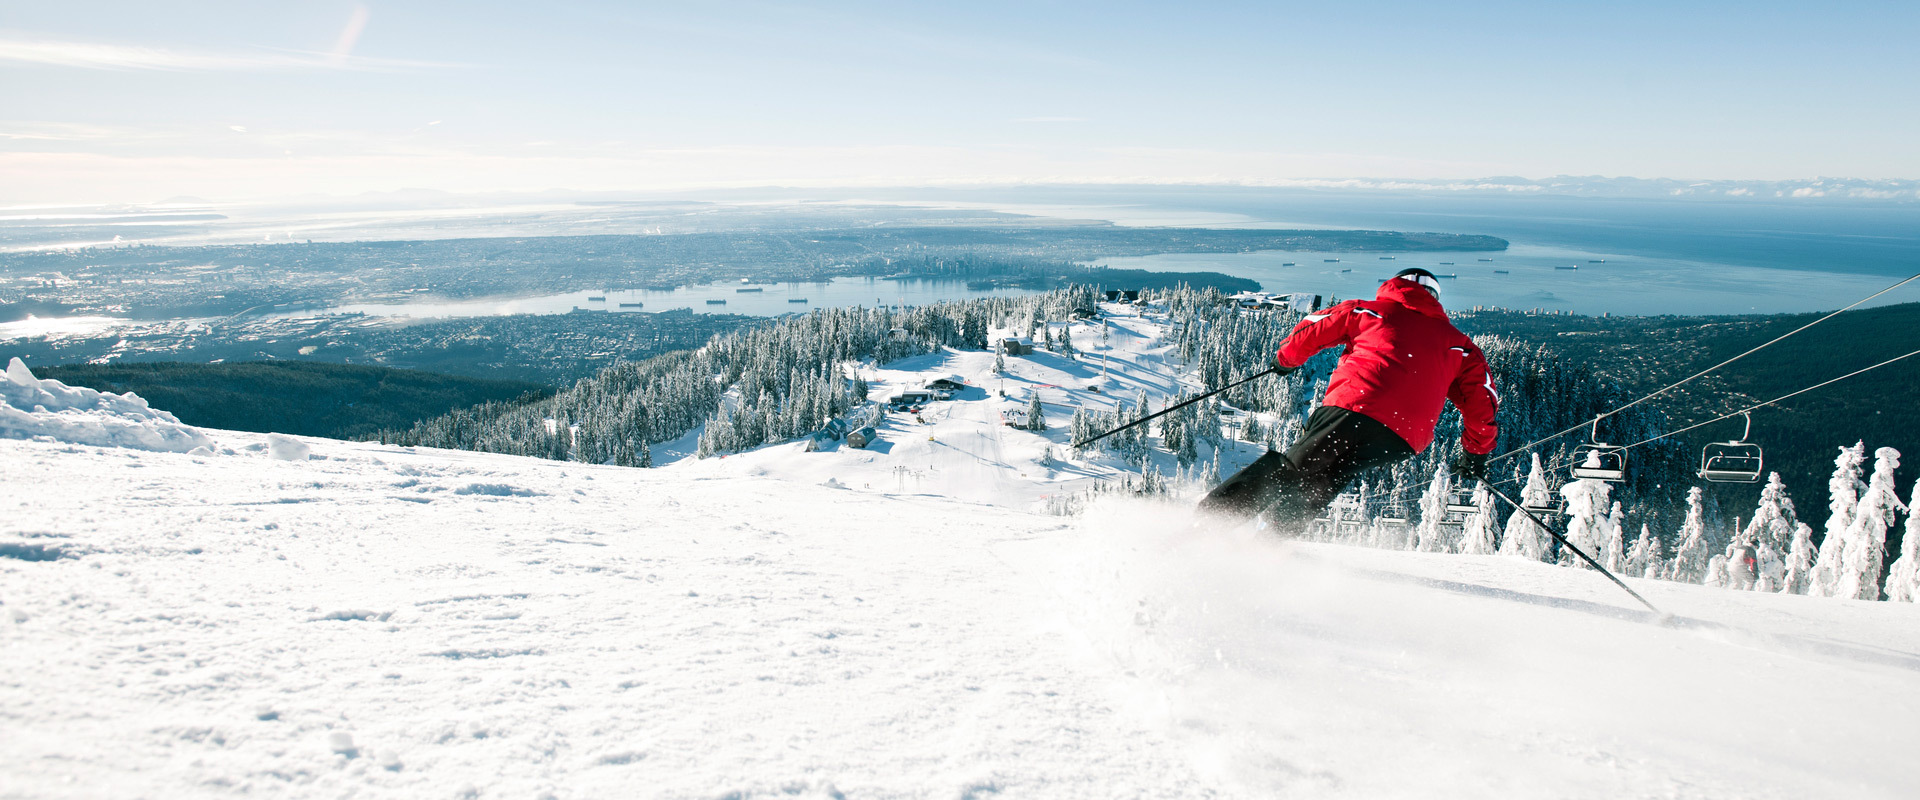 Thrills on the Hill at Grouse Mountain